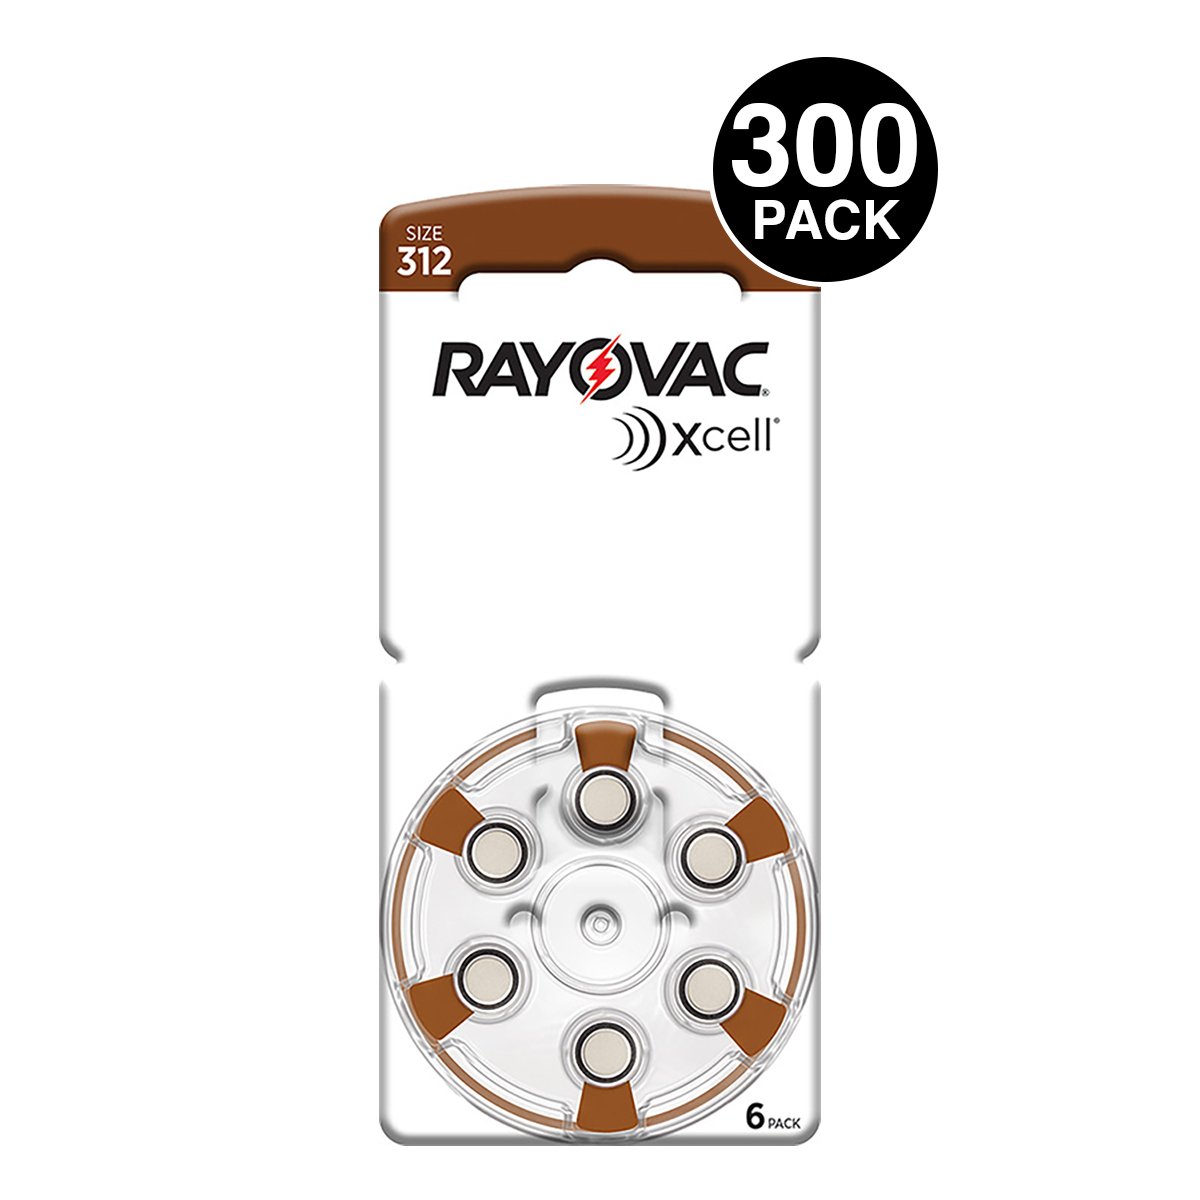 Xcell (Made By Rayovac) Size 312 Hearing Aid Batteries (300 Pcs)